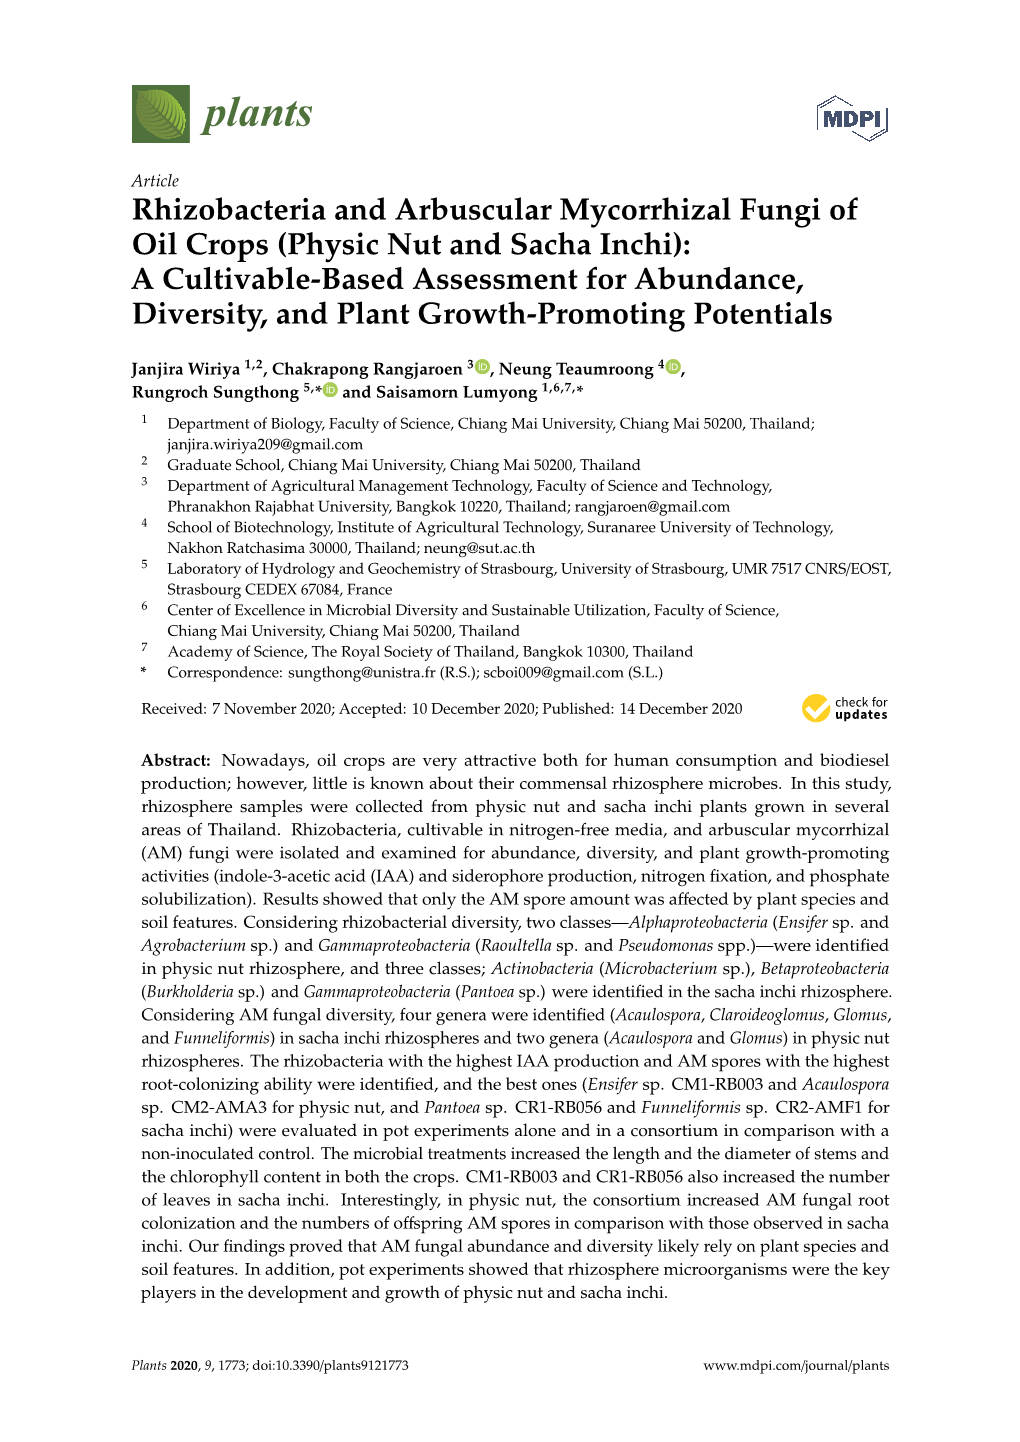 Physic Nut and Sacha Inchi): a Cultivable-Based Assessment for Abundance, Diversity, and Plant Growth-Promoting Potentials